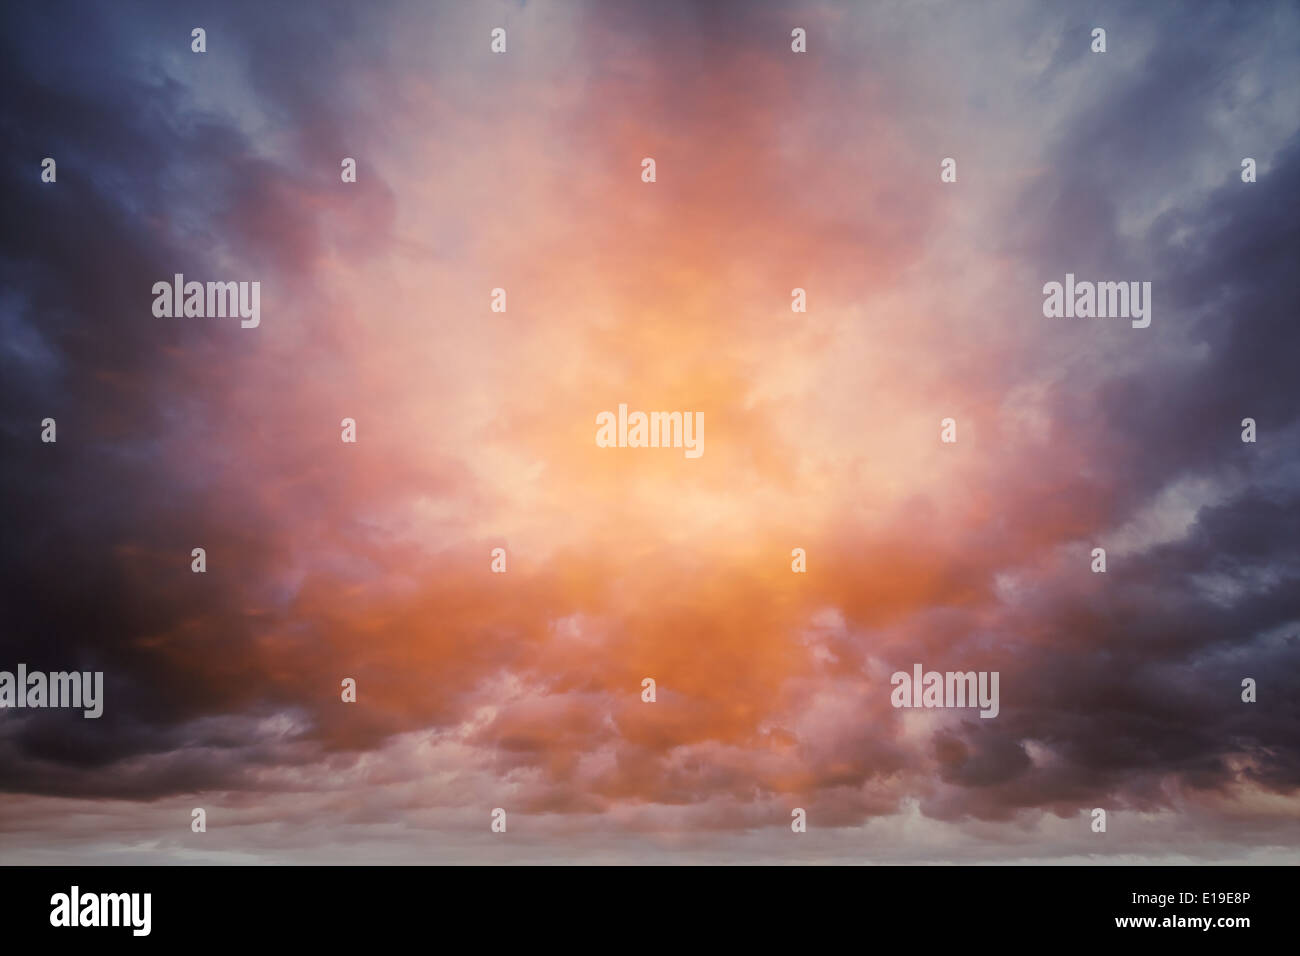 Dark colorful stormy cloudy sky photo background Stock Photo